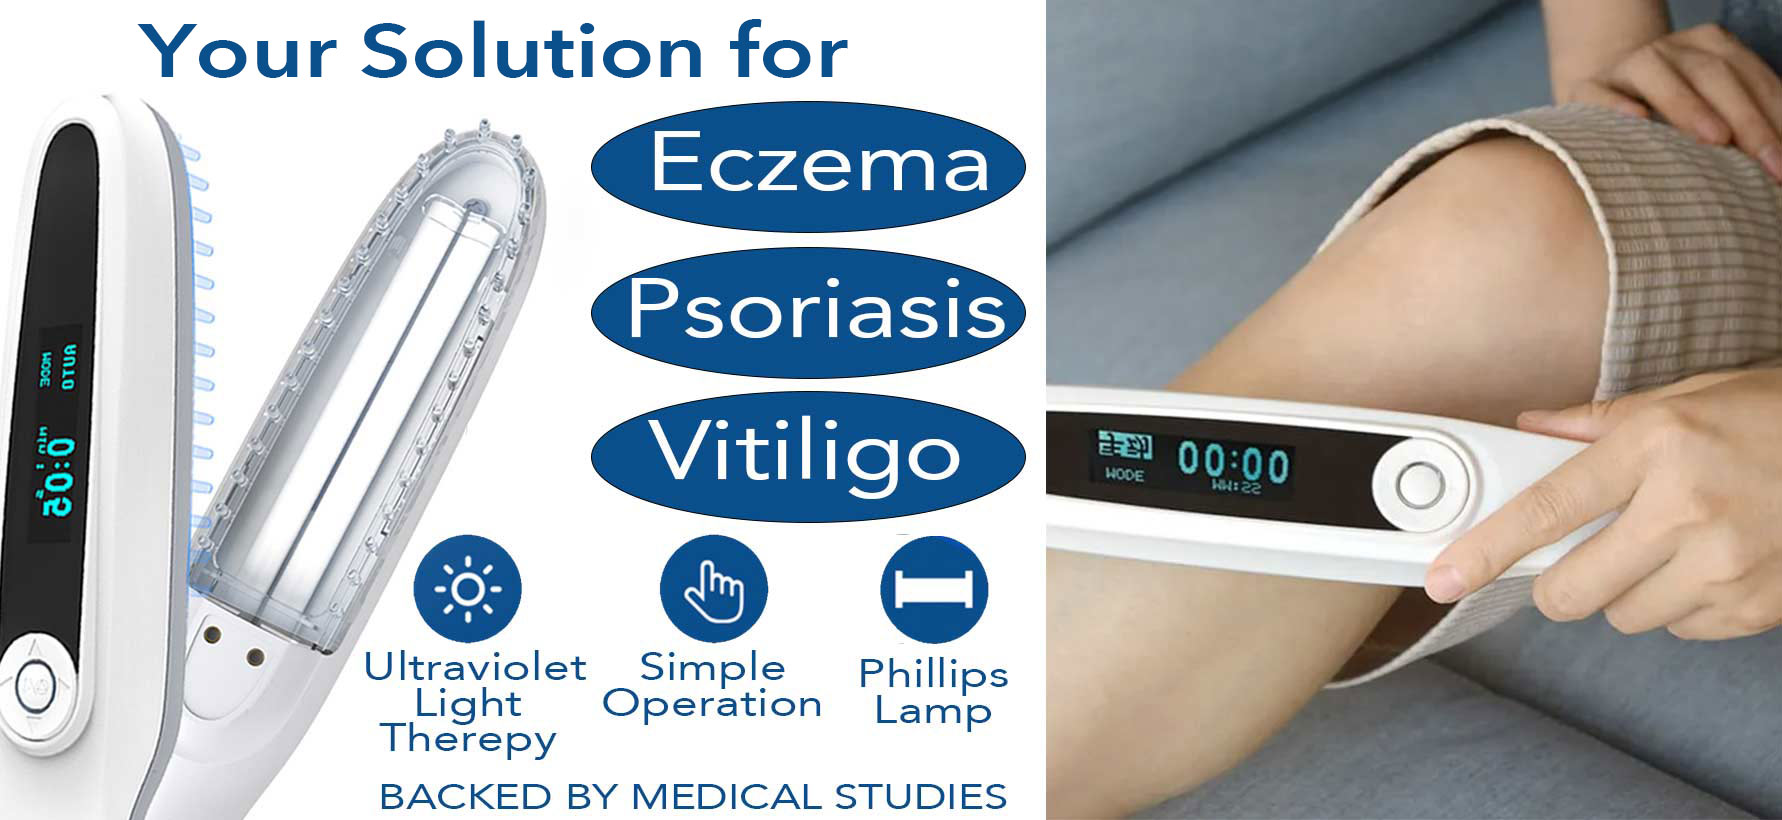 Help Treat Cure Eczema Psoriasis in South Africa